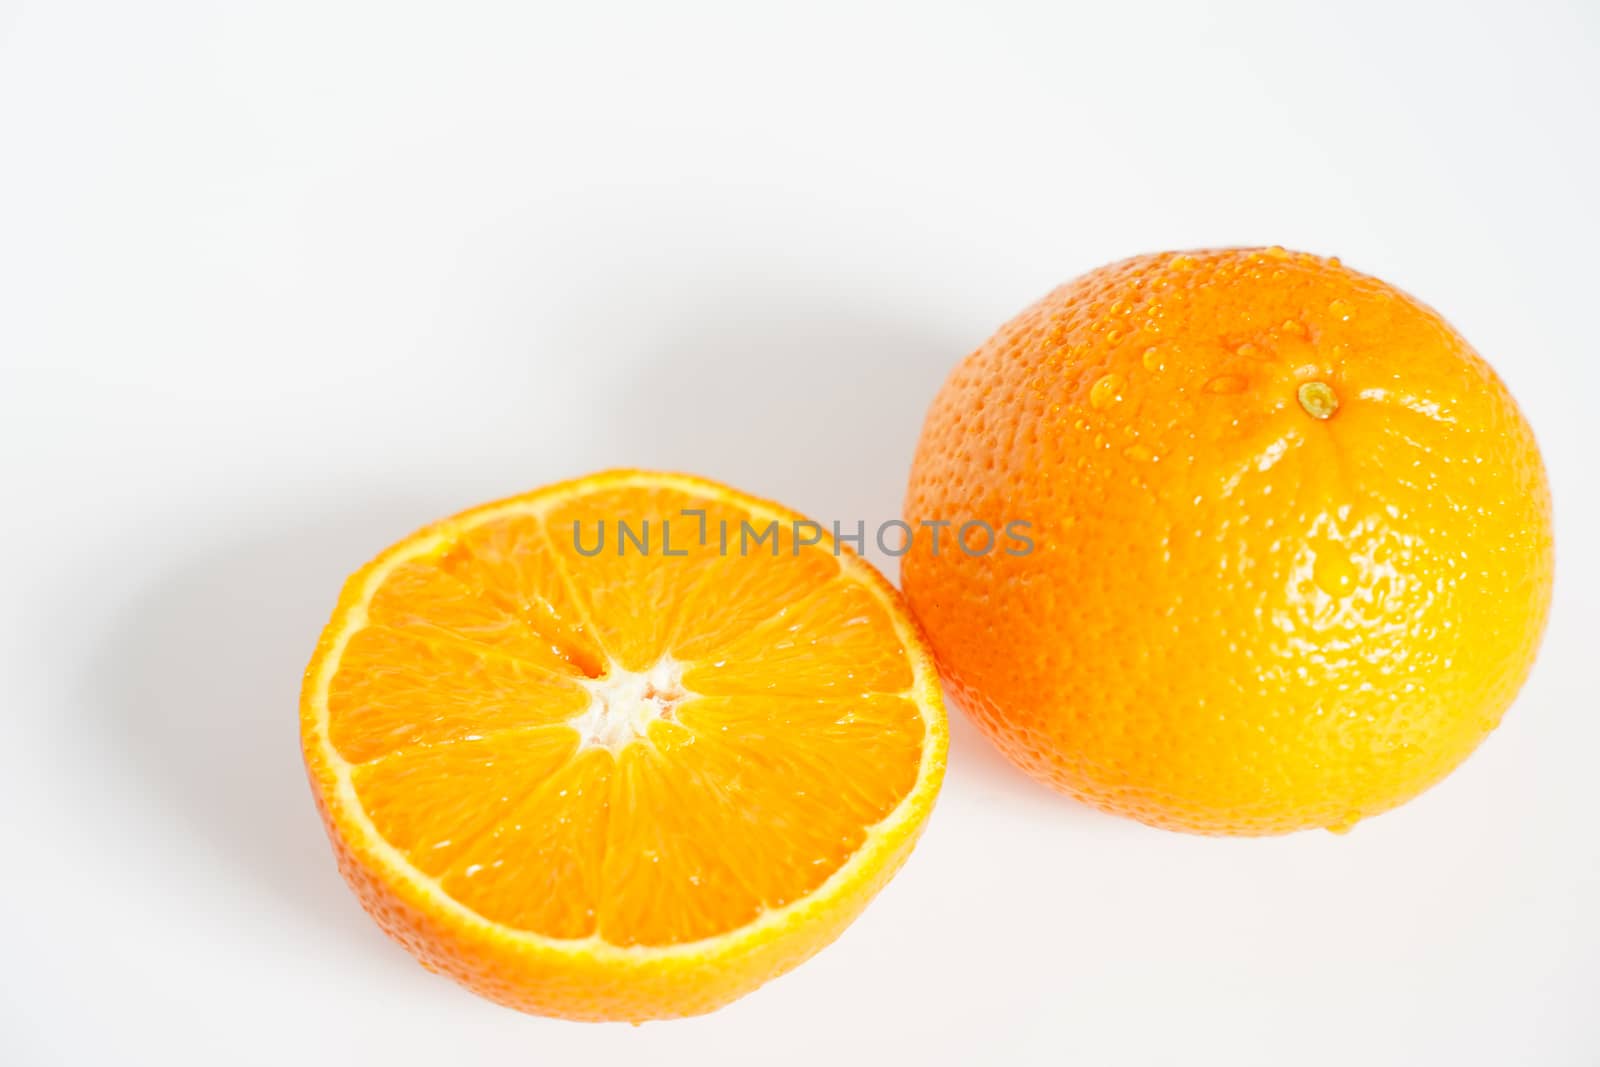 A Sliced Orange against a plain white background by samULvisuals